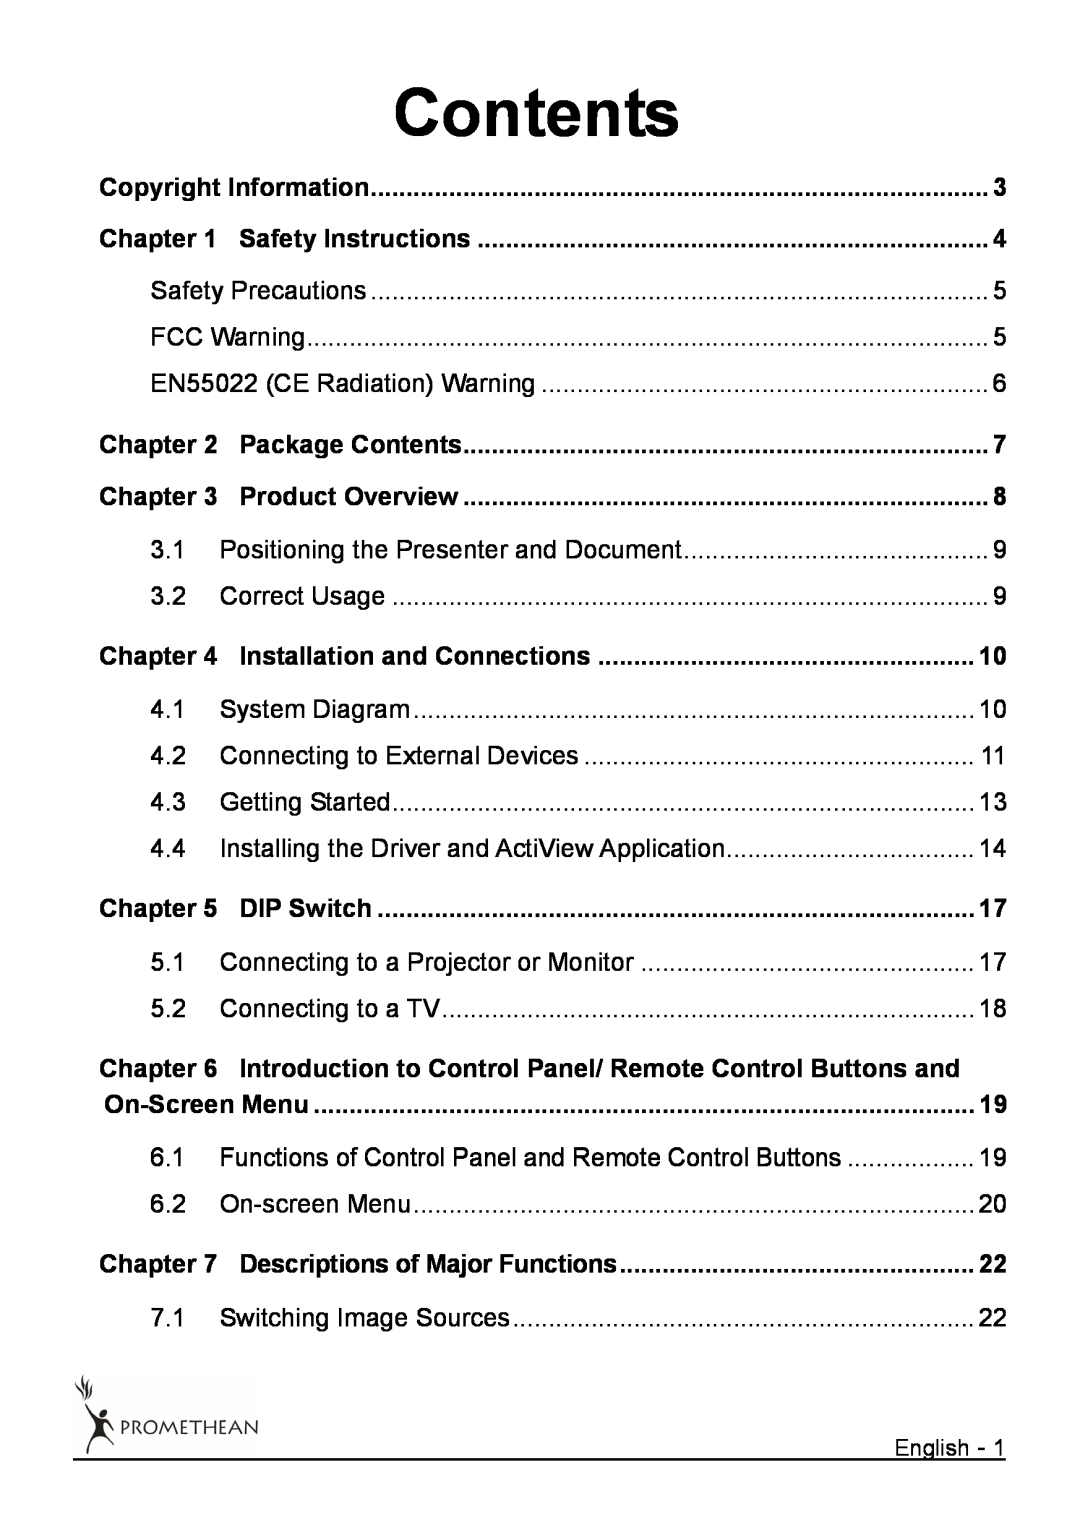 Promethean 322 user manual Contents, Chapter 